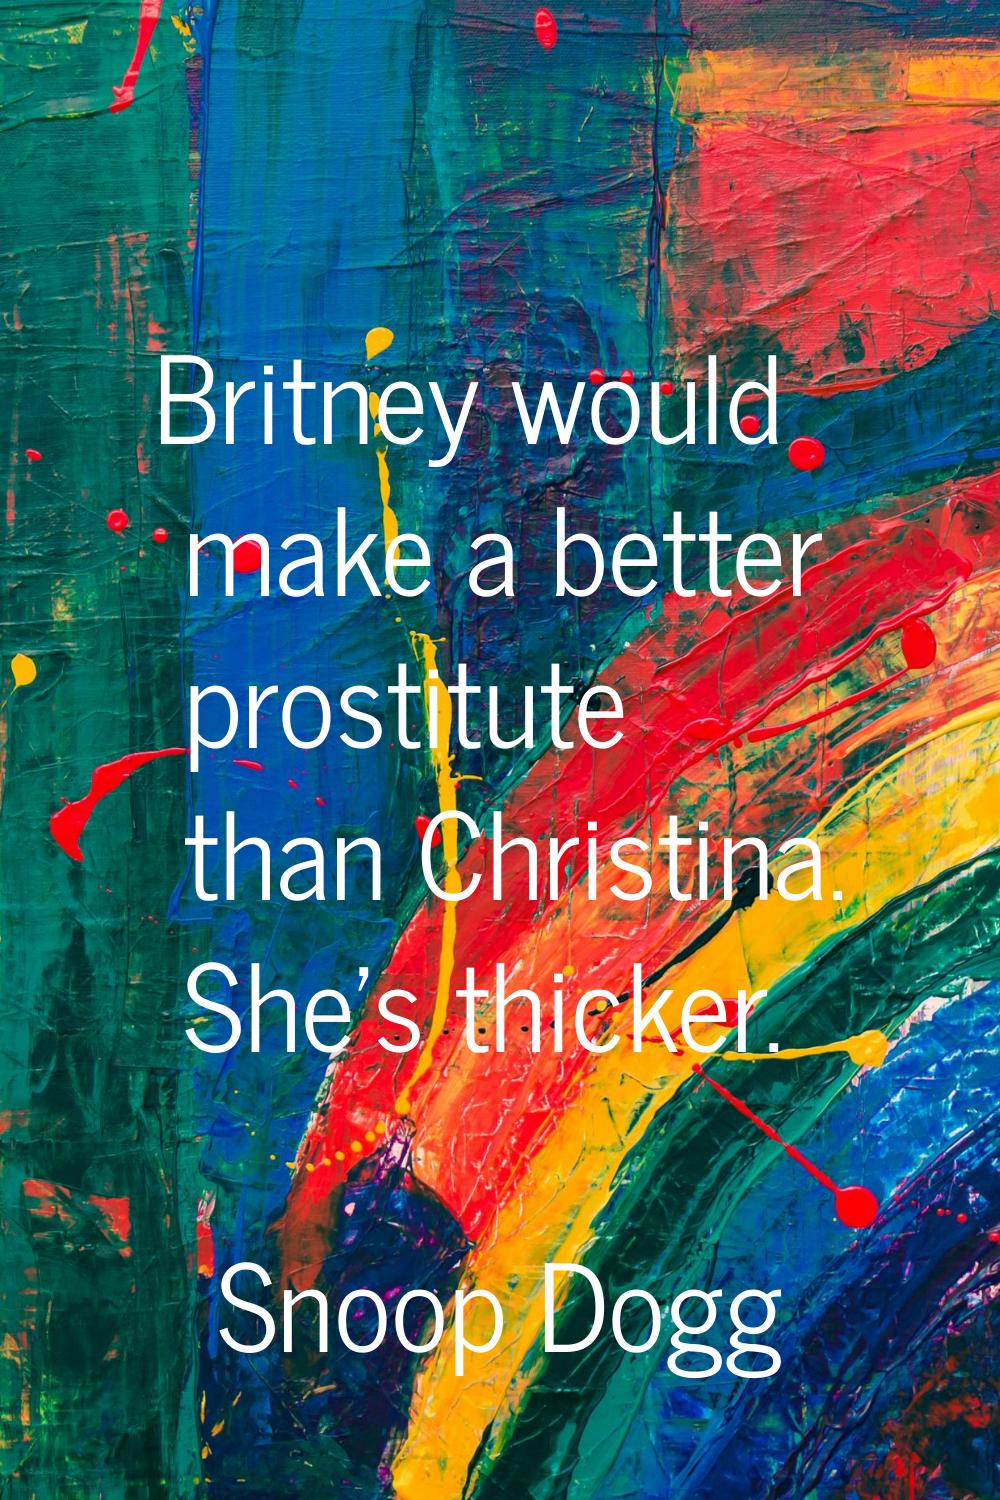 Britney would make a better prostitute than Christina. She's thicker.